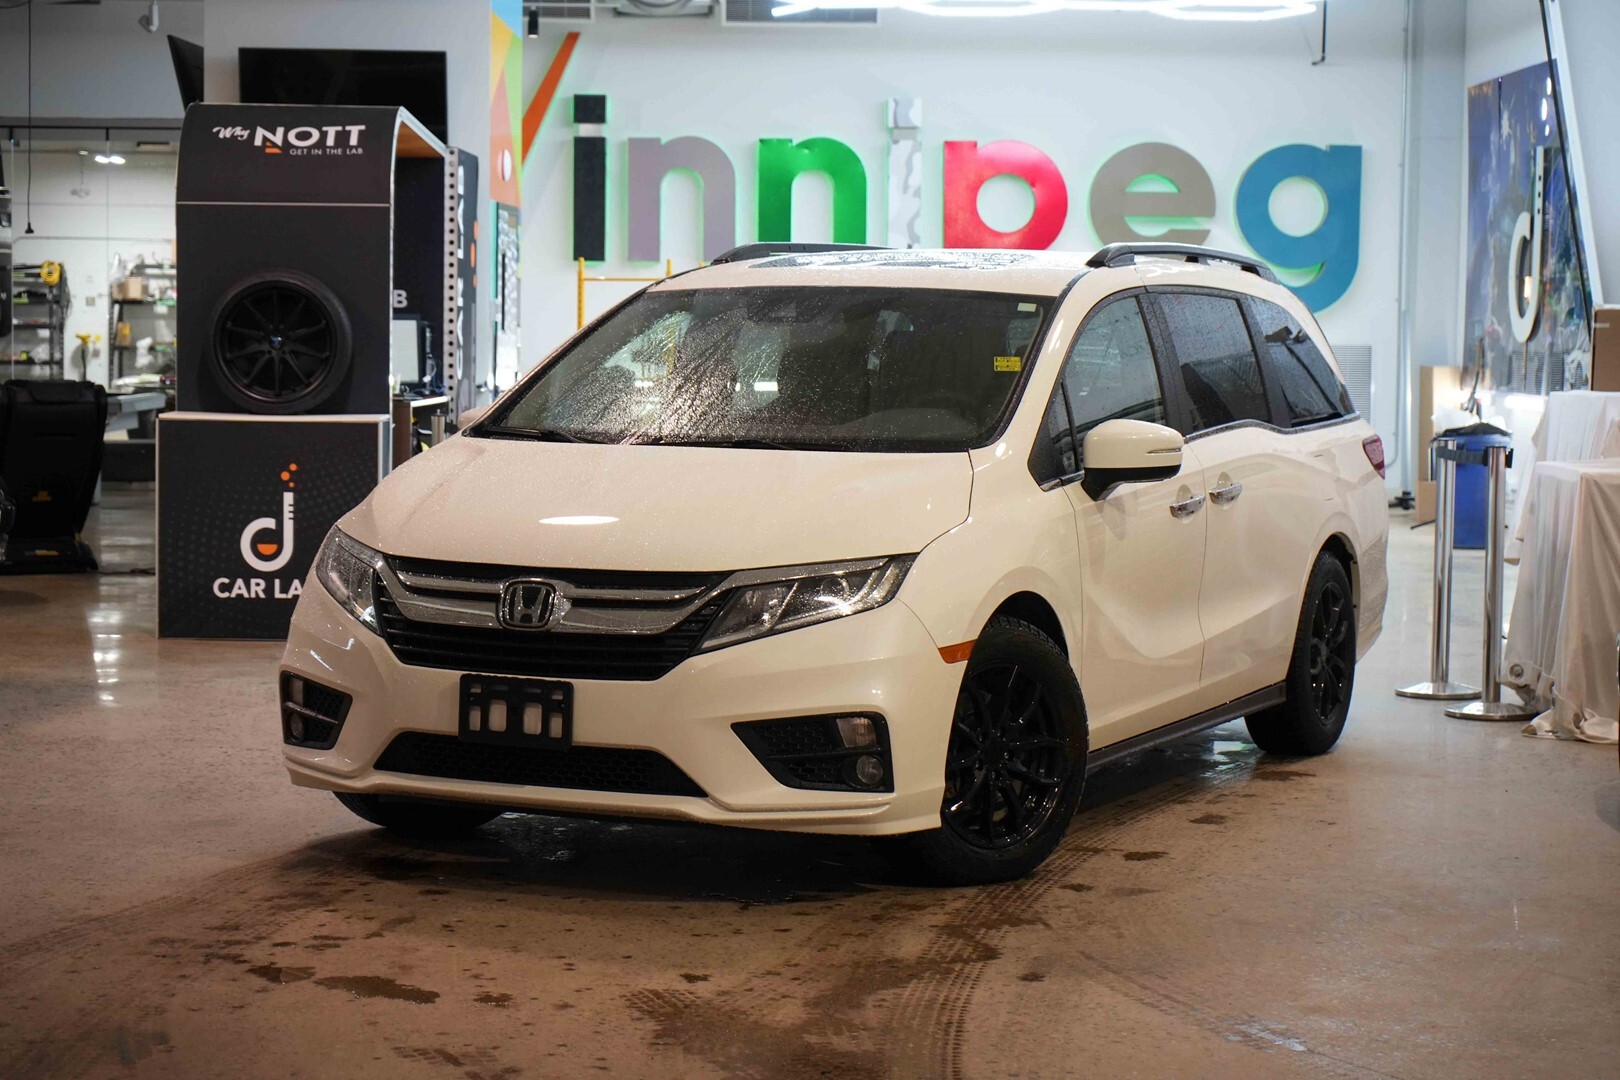 2019 Honda Odyssey EX *DELIVERED* | 3,000 lbs Max Towing Capacity